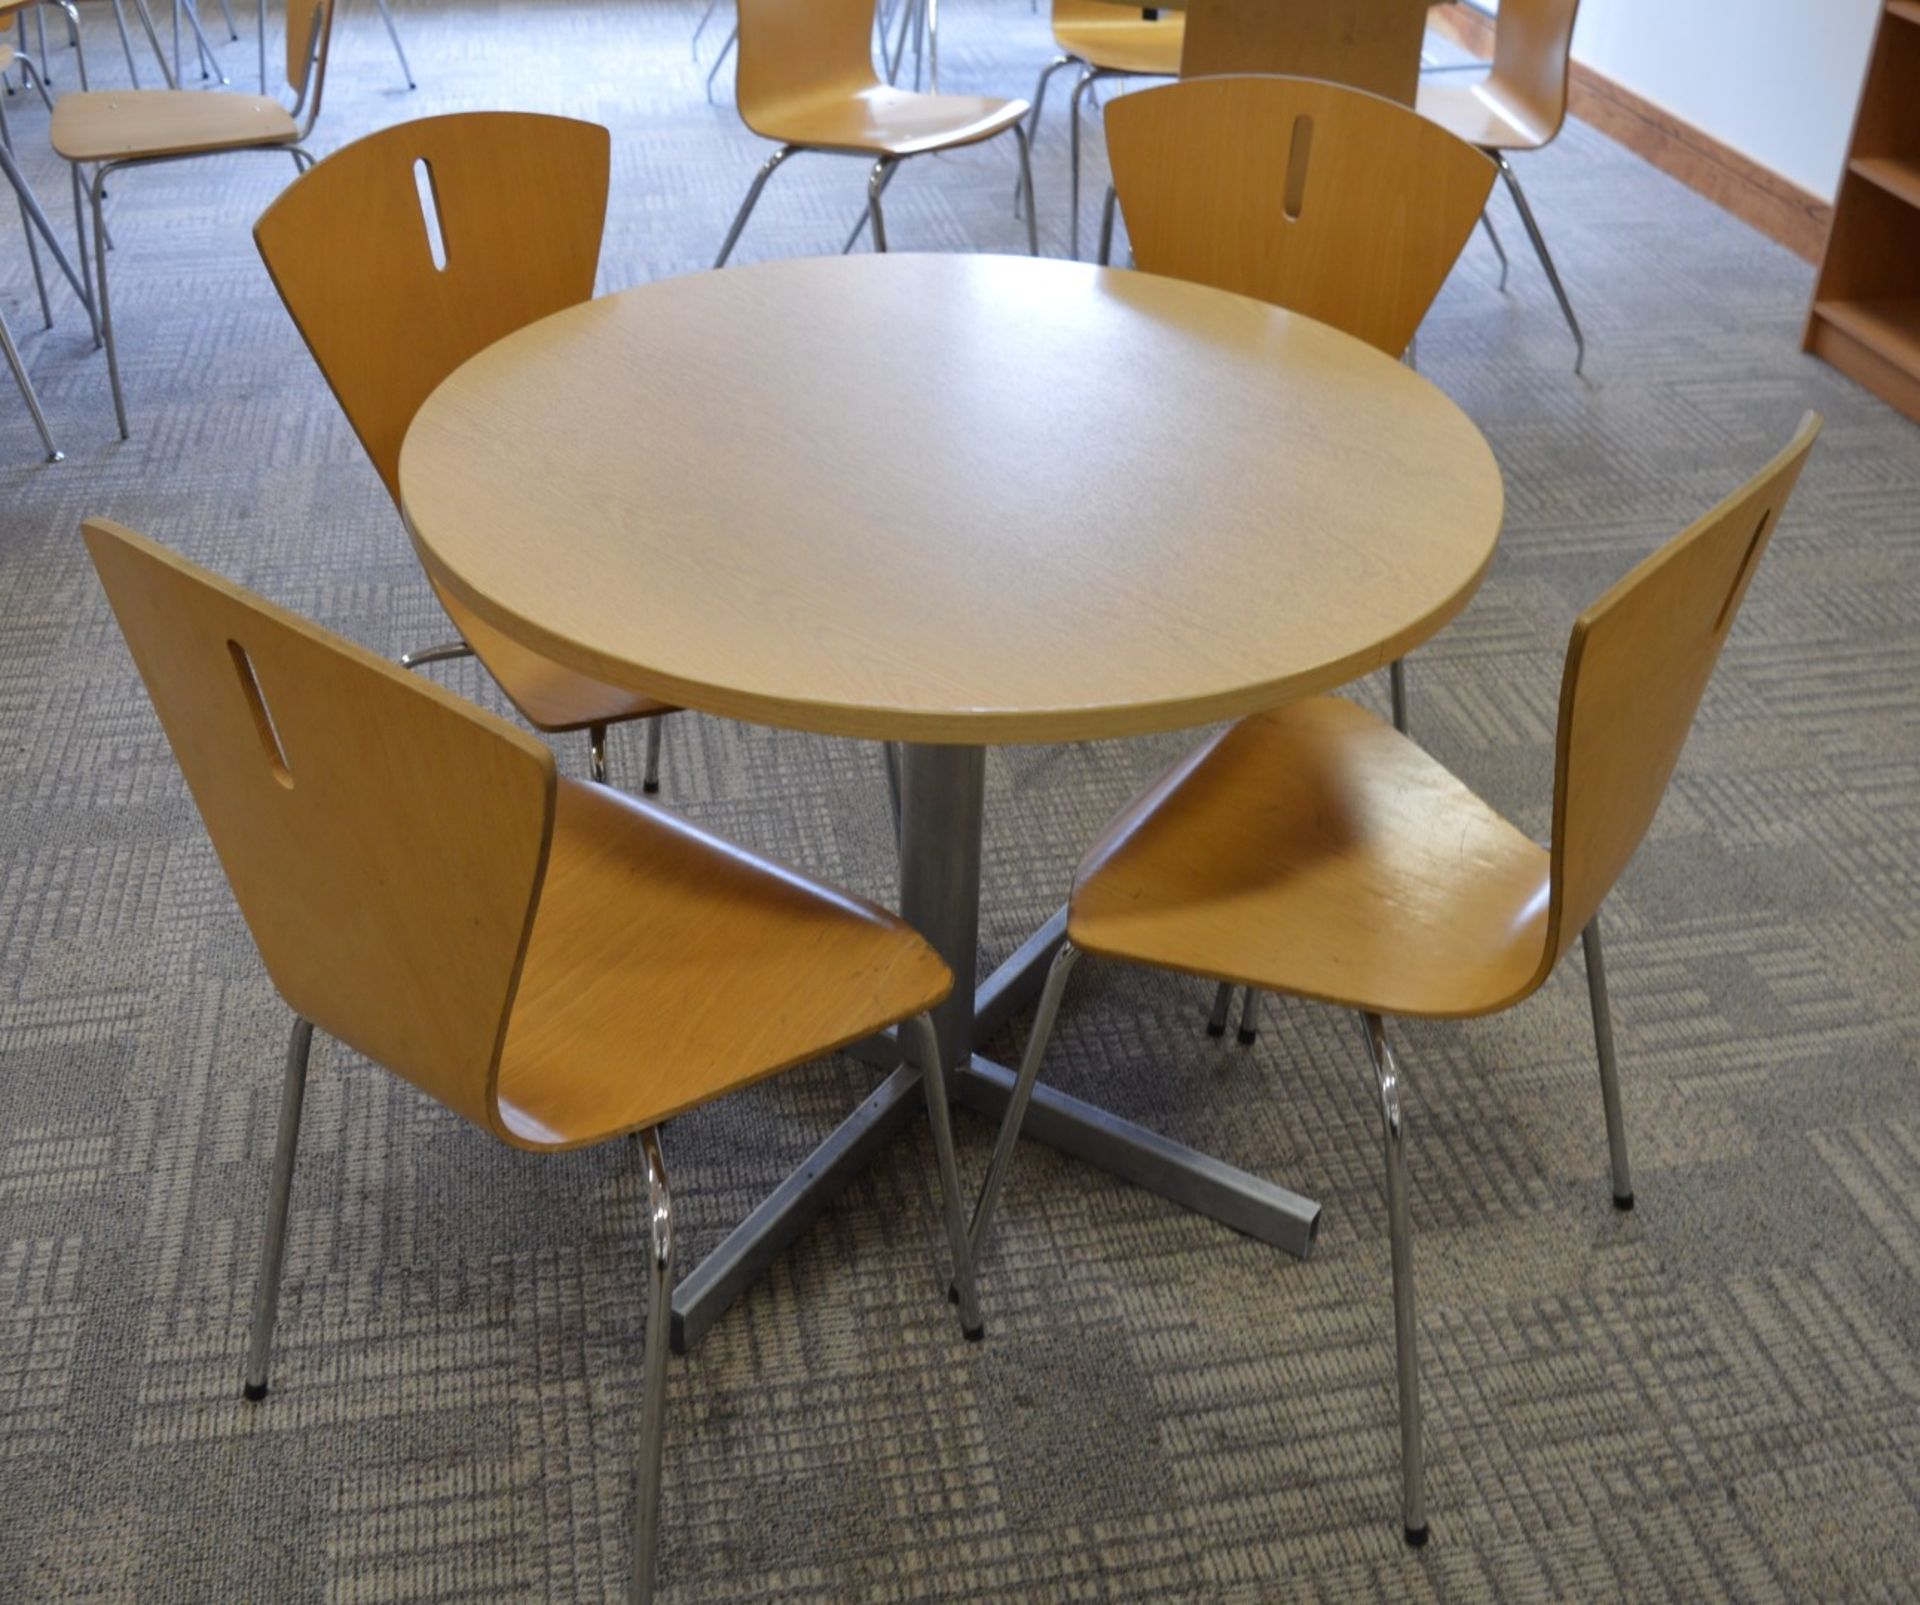 1 x Staff Room Table With Four Matching Chairs - Oak Table Finish and Beech Chairs - Contemporay - Image 2 of 4